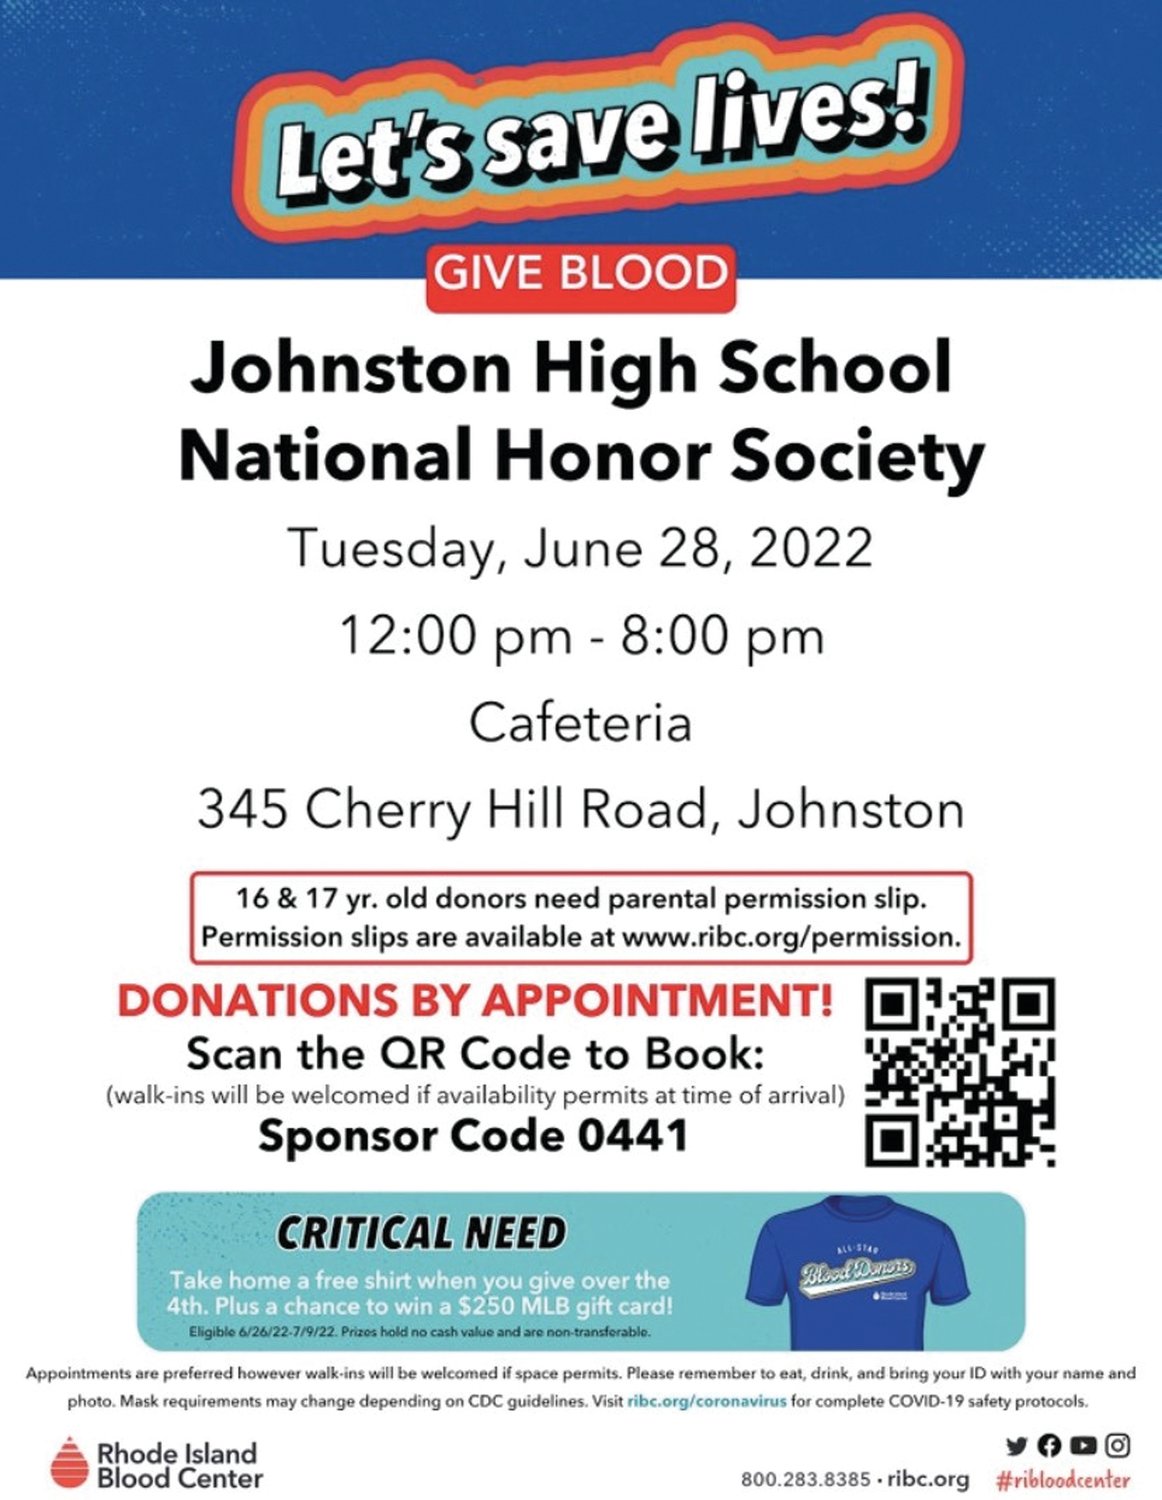 To make an appointment for the drive, visit this link: https://donate.ribc.org/donor/schedules/sponsor_code (and type in 0441 as the sponsor code in which the Johnston High School drive will pop up and you can schedule your appointment).